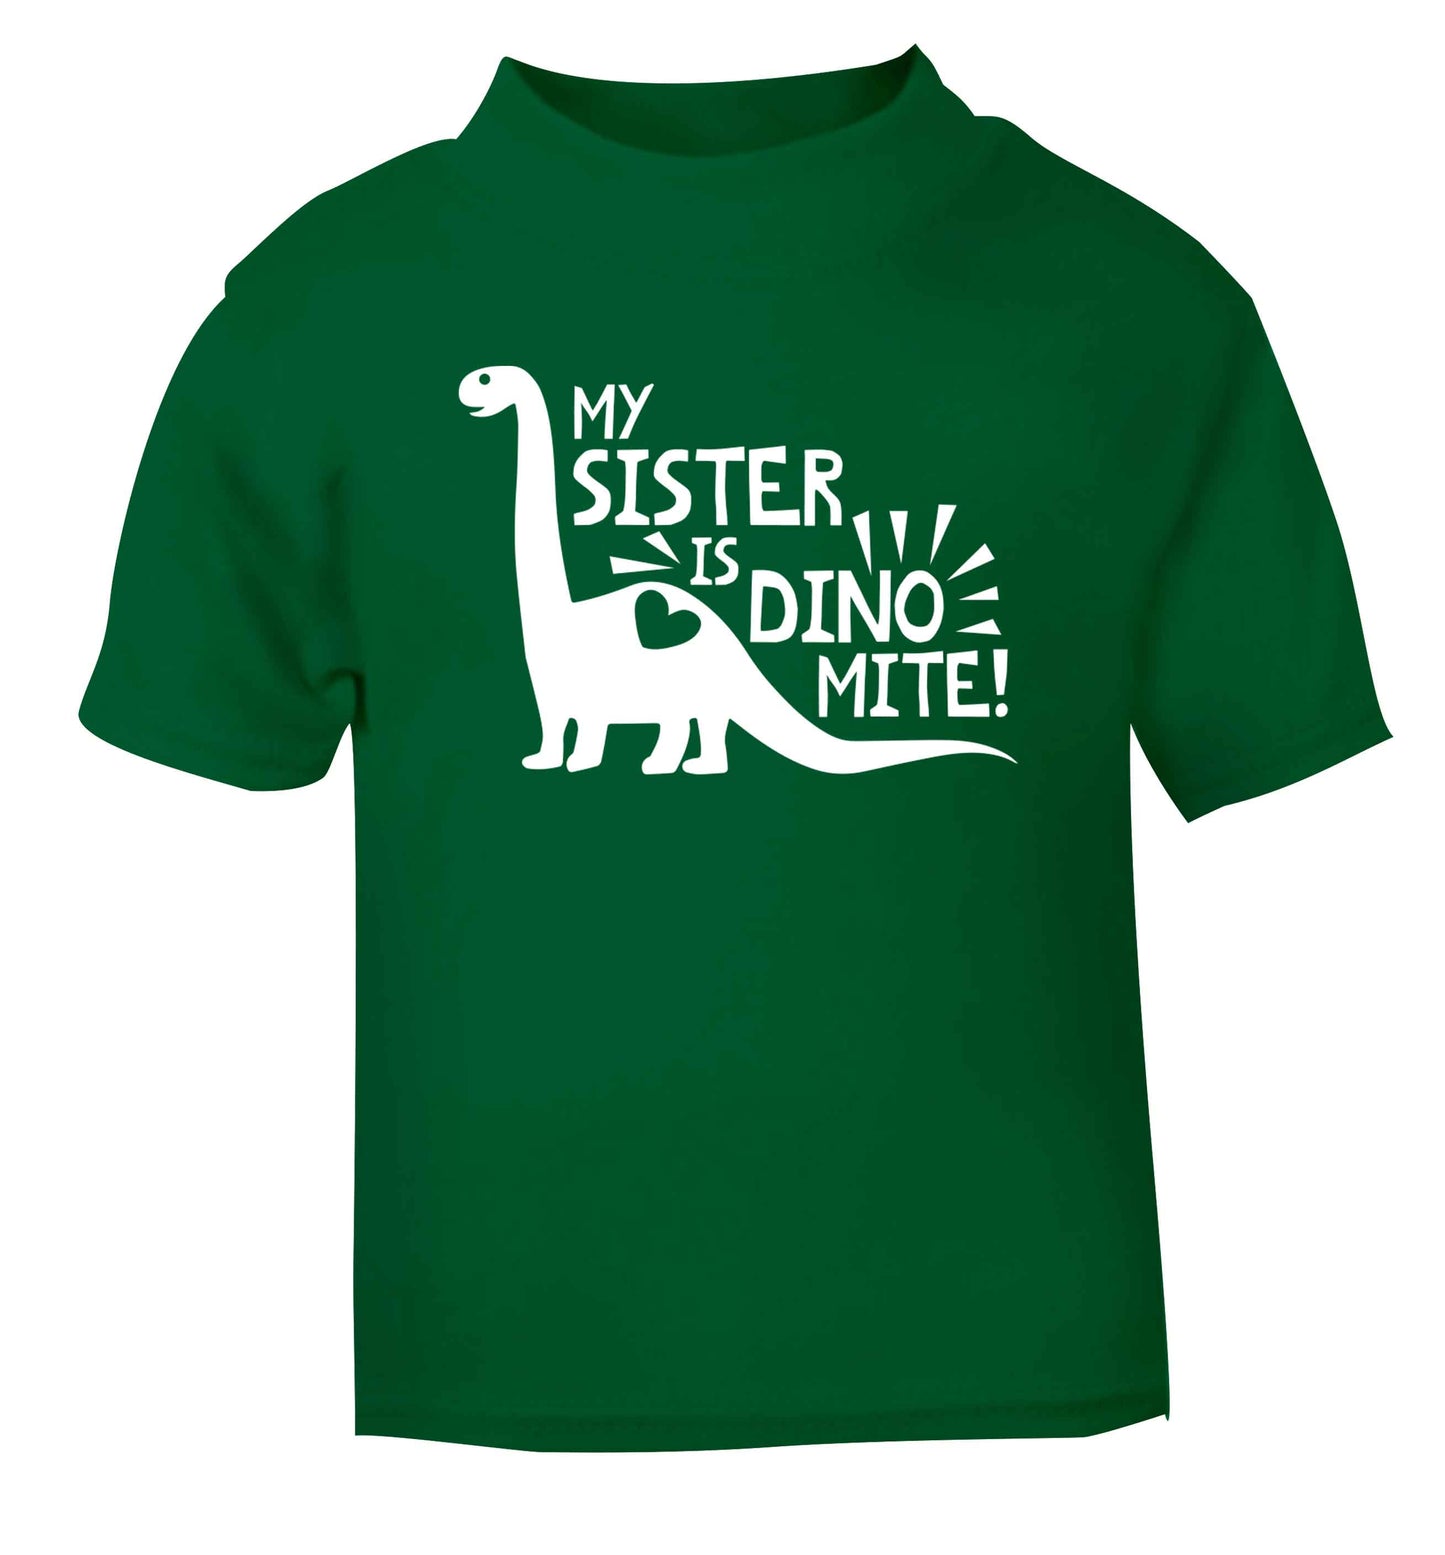 My sister is dinomite! green Baby Toddler Tshirt 2 Years